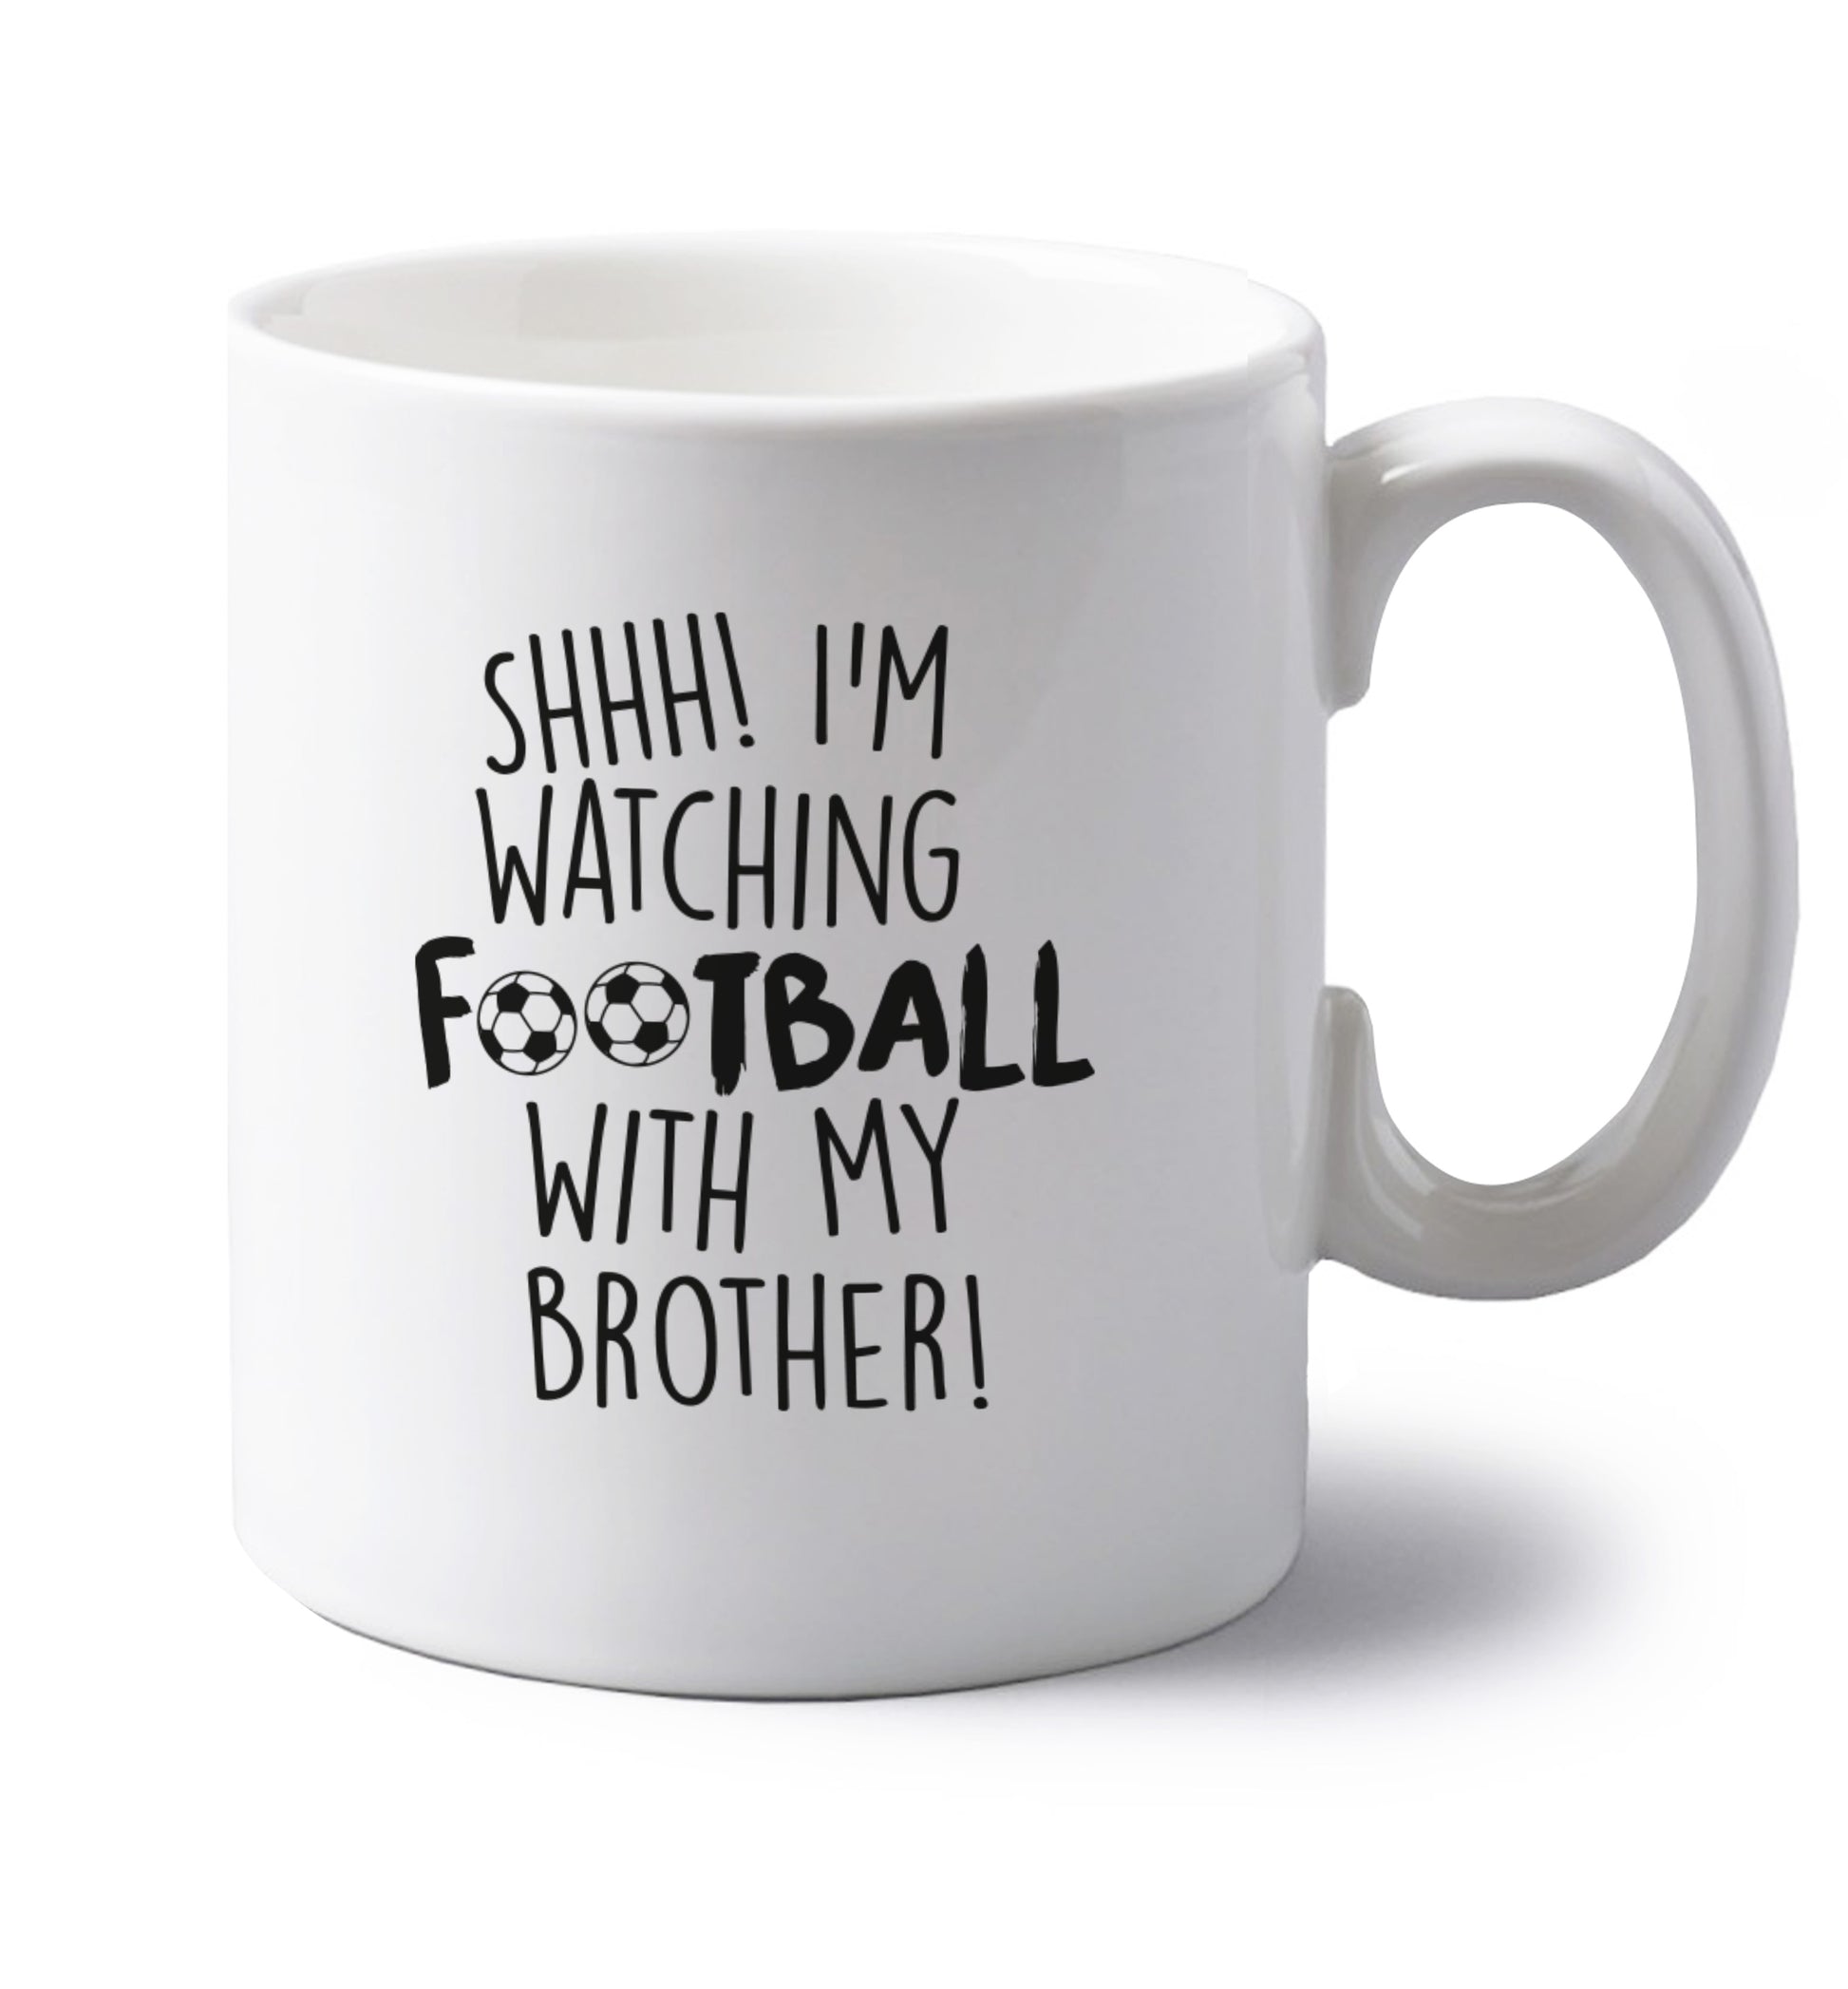 Shhh I'm watching football with my brother left handed white ceramic mug 